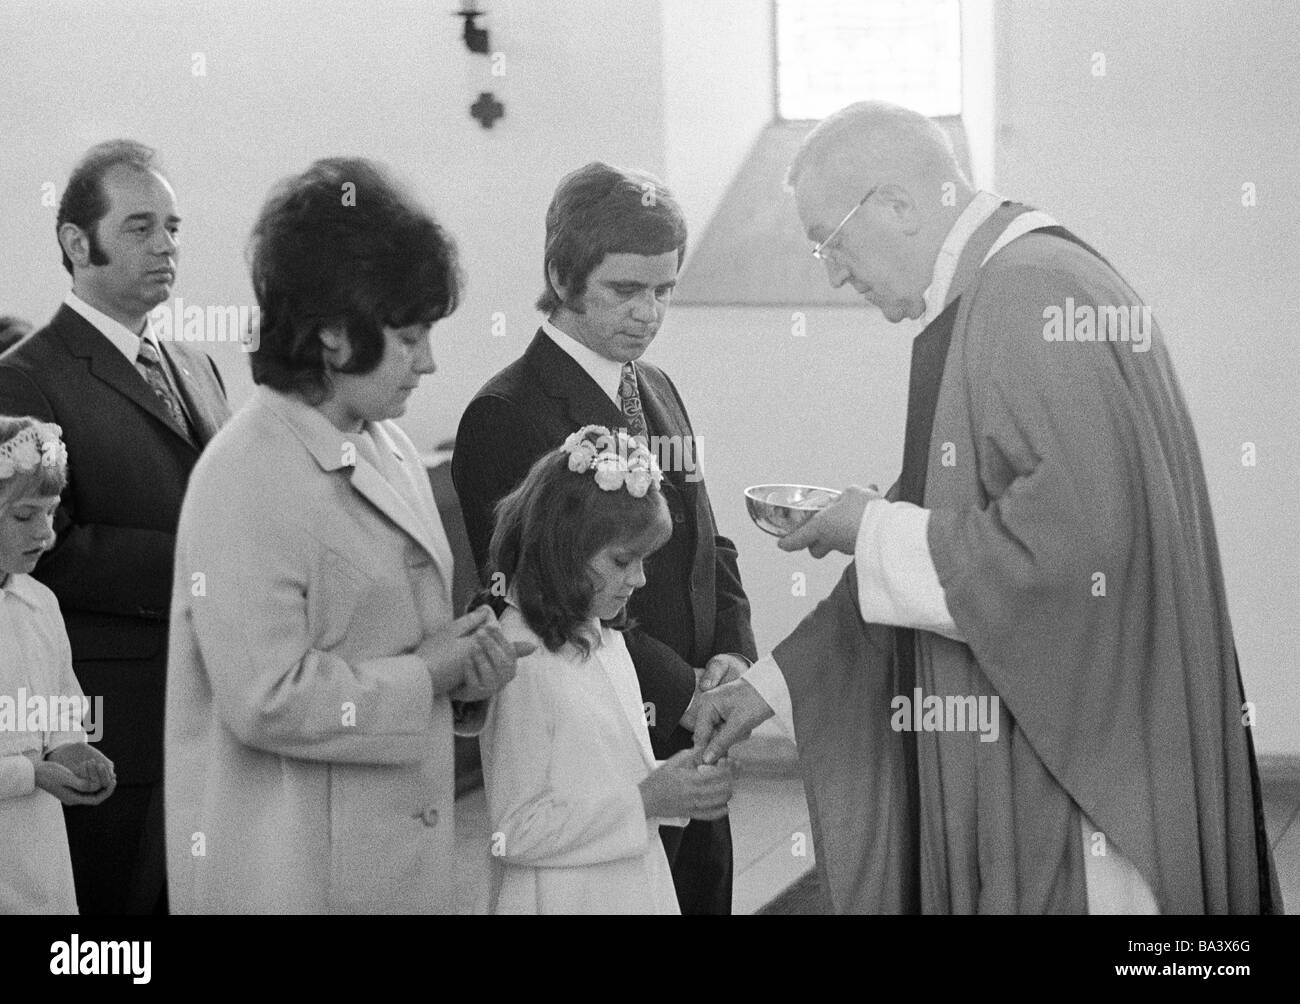 Seventies, black and white photo, religion, Christianity, First Communion, Eucharistic mass, in the presence of father and mother a priest administers the Holy Communion to a girl, aged 8 to 12 years, aged 30 to 40 years, aged 55 to 65 years, Birgit, Doris, Fredi Stock Photo